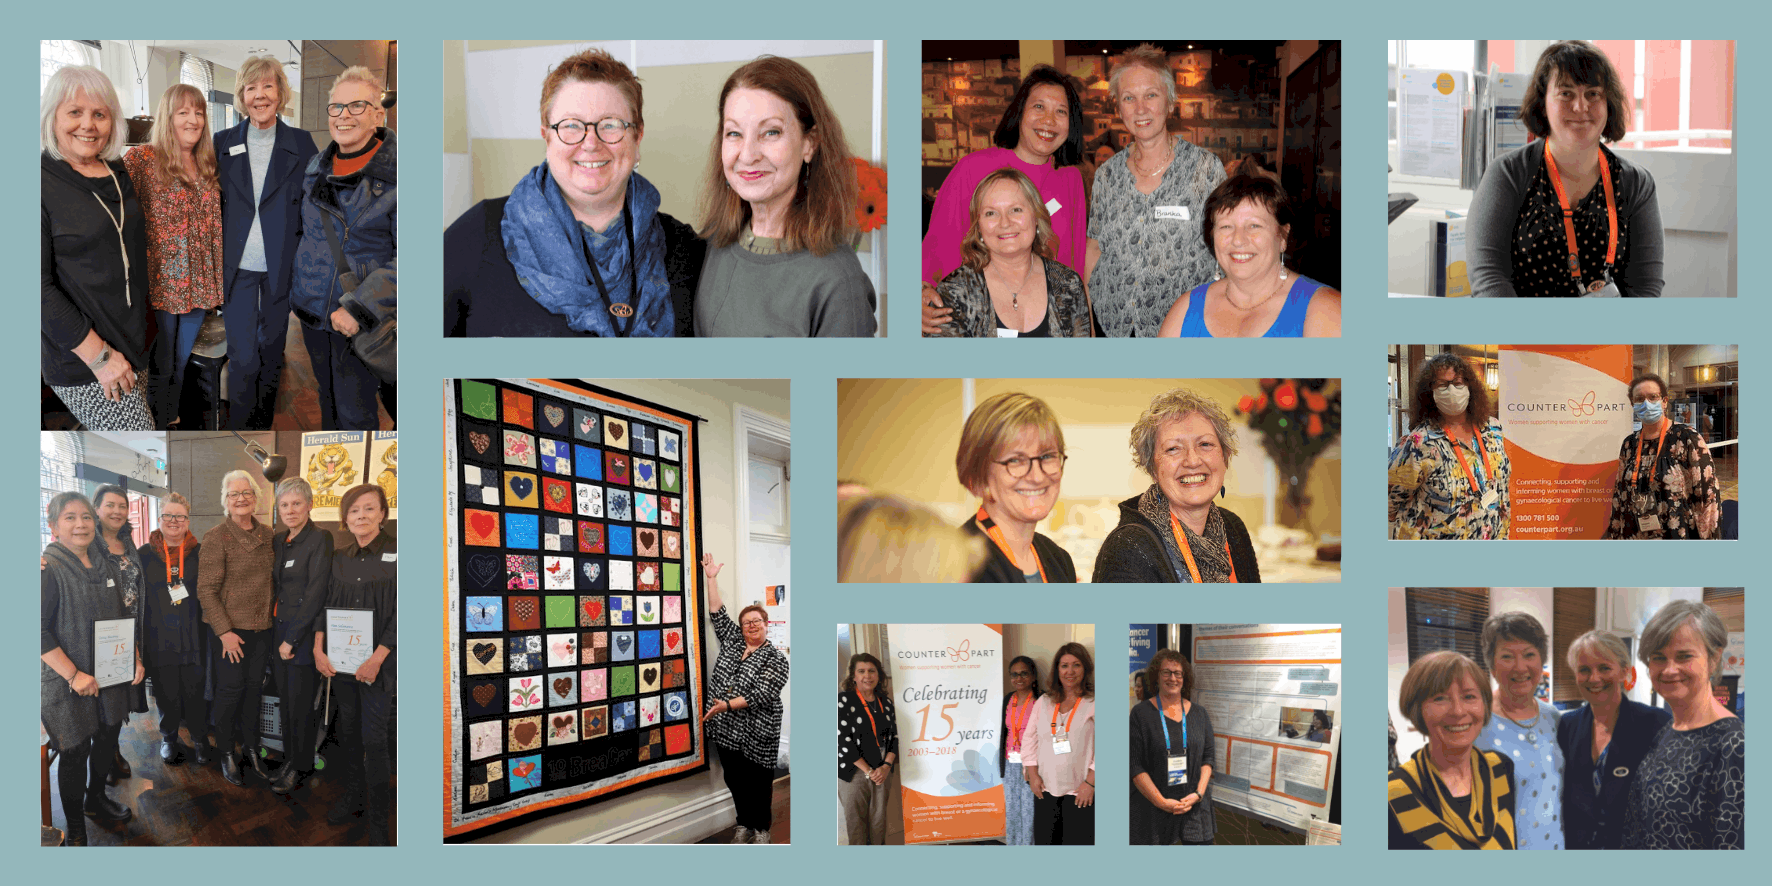 Collage of images featuring Counterpart staff and volunteers